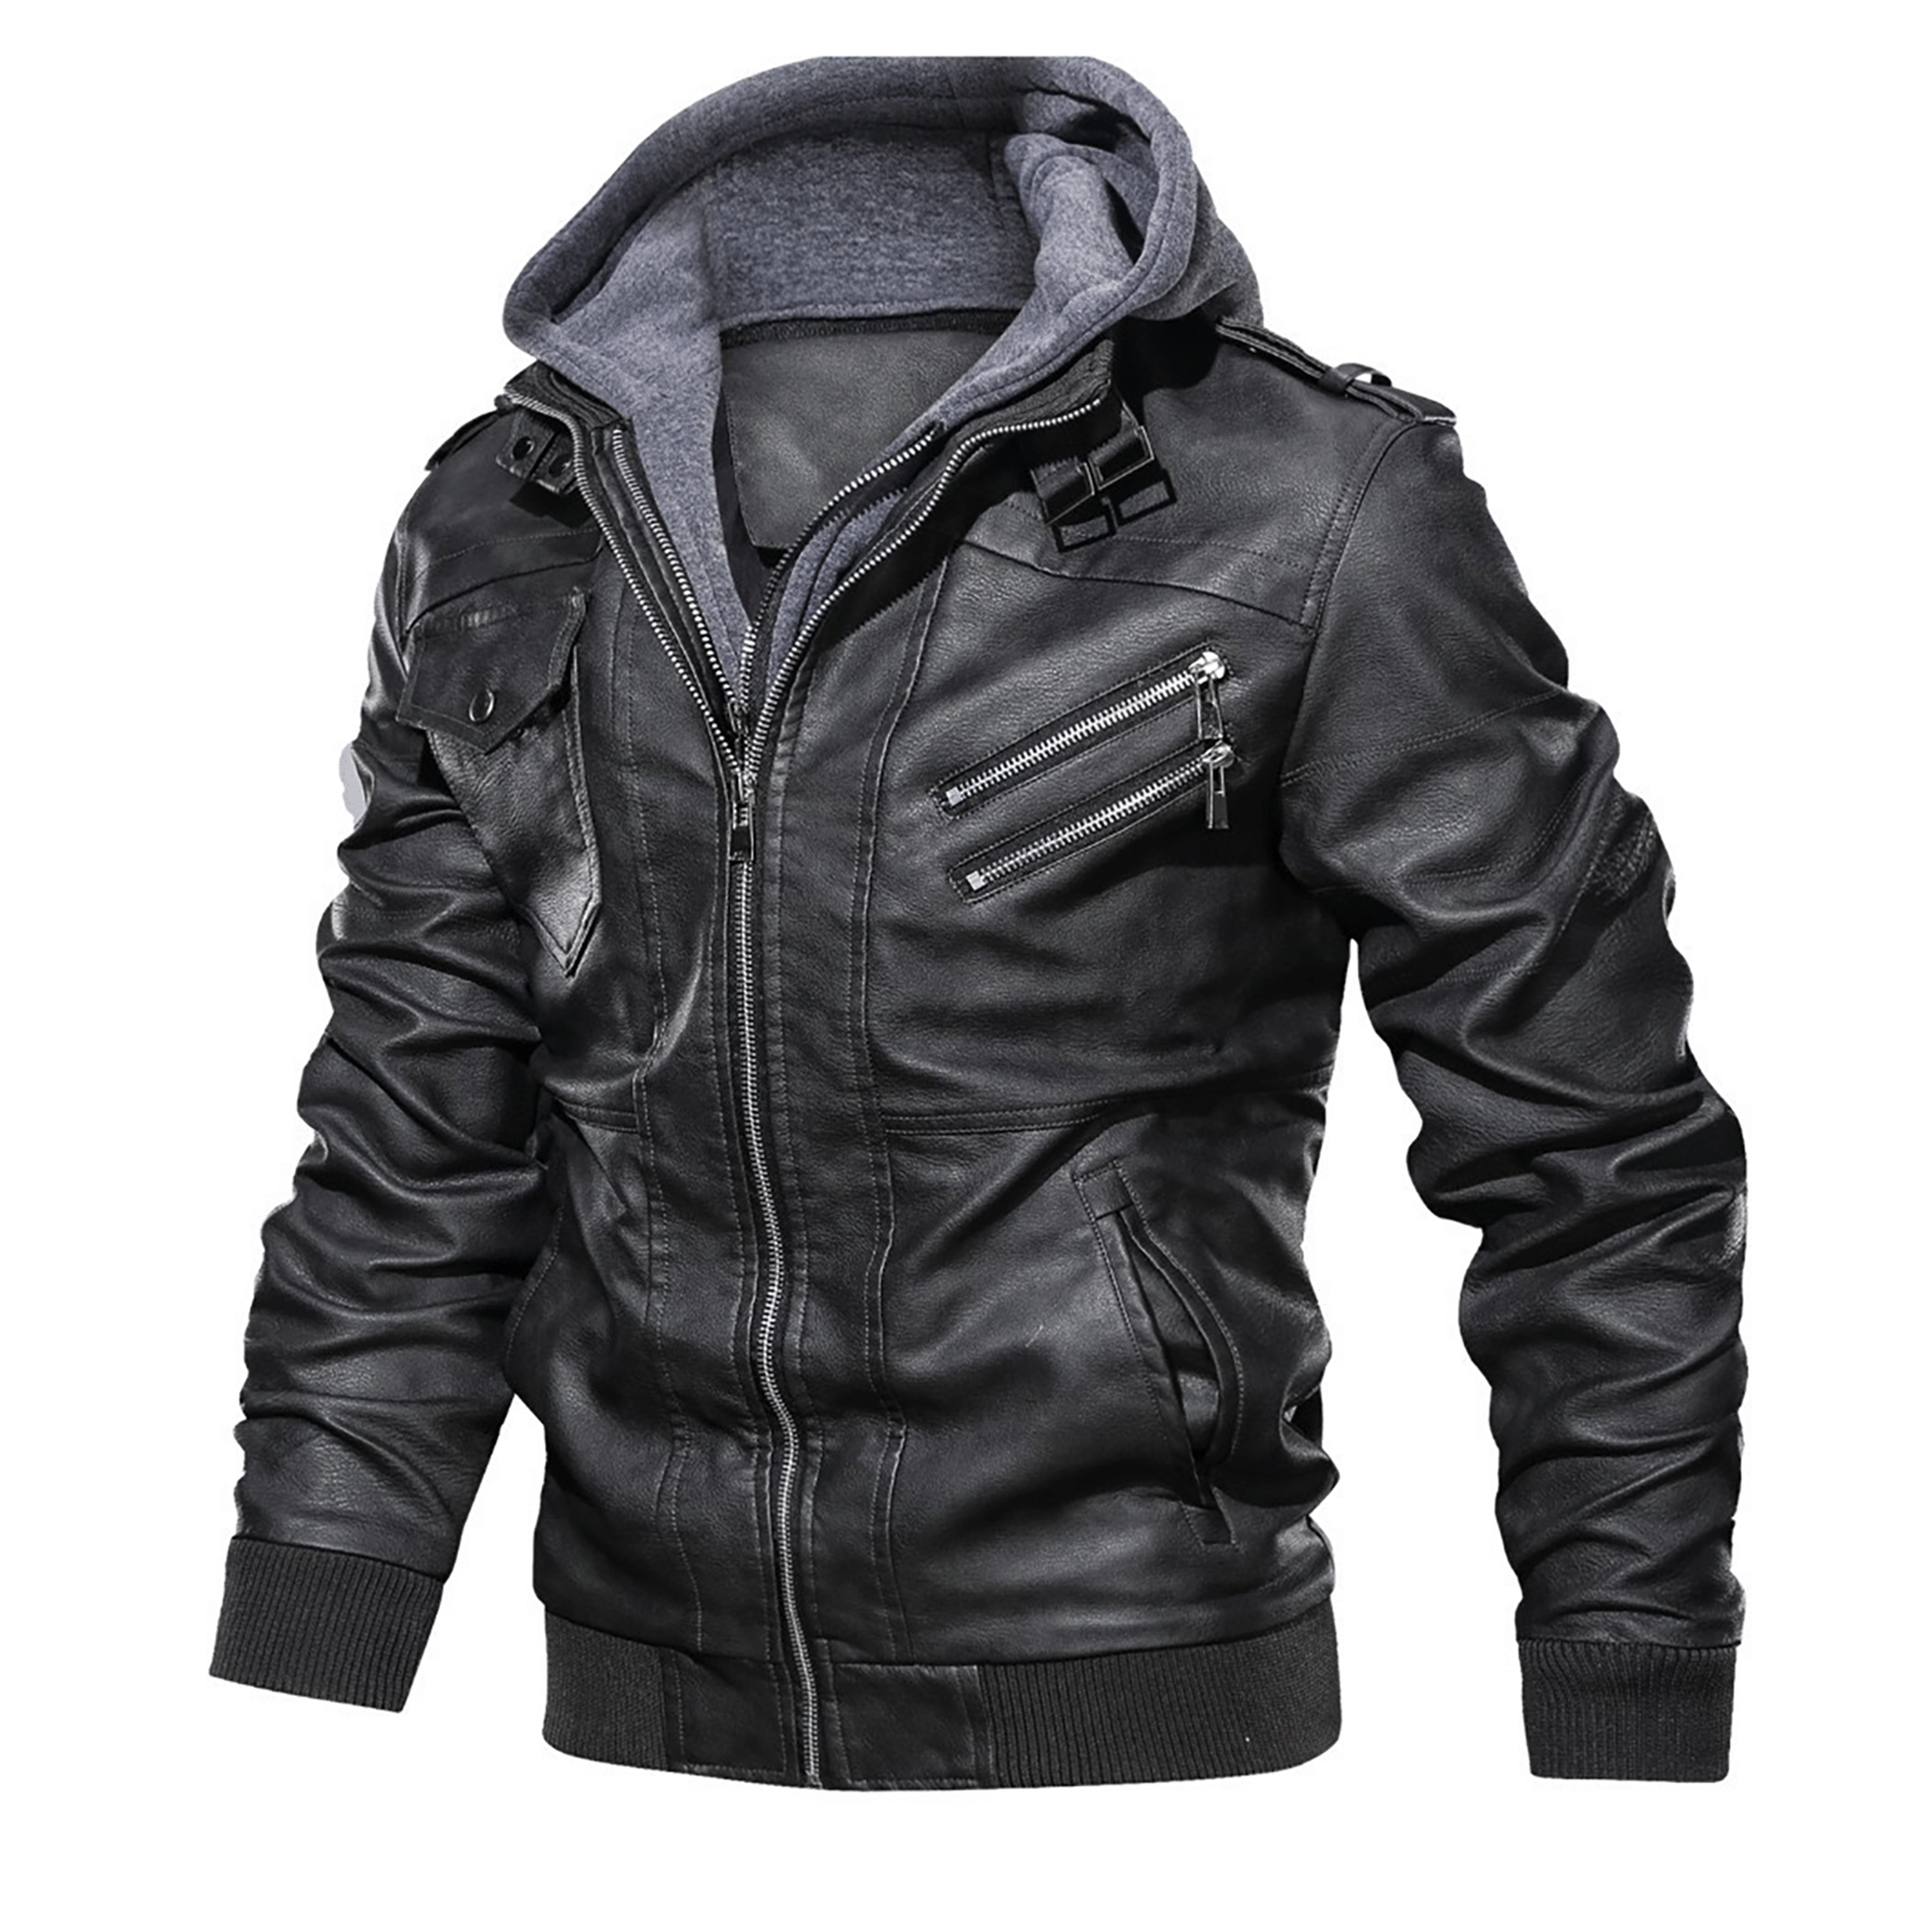 Top leather jackets and latest products 235